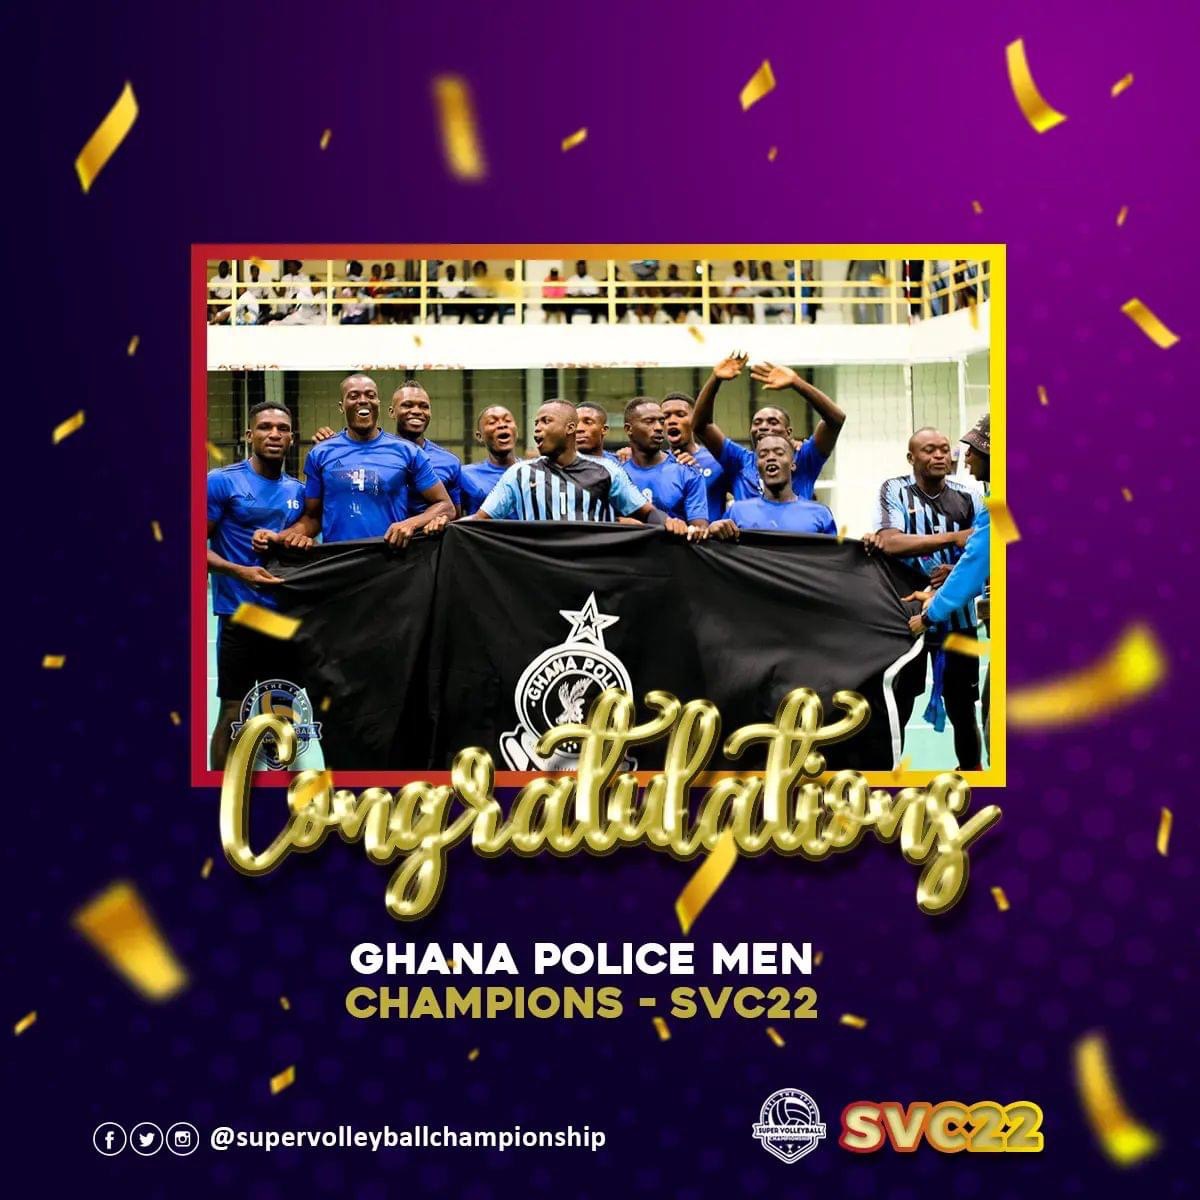 Air Force, Ghana Police crowned ultimate winners at 2022 Super Volleyball Championship